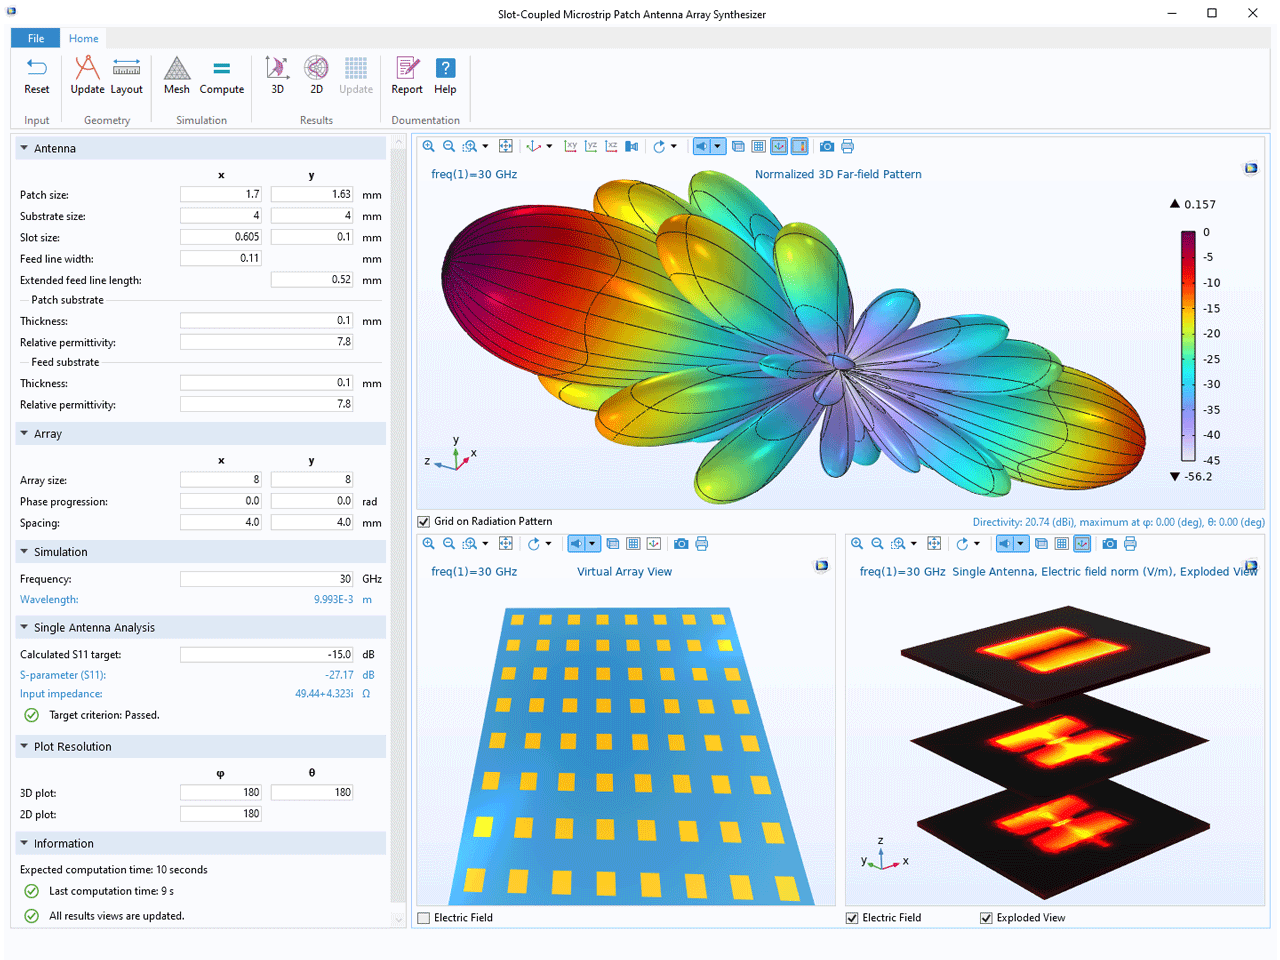 The user interface of a Slot-Coupled Microstrip Patch Antenna Array simulation app with input fields on the left and model results on the right.